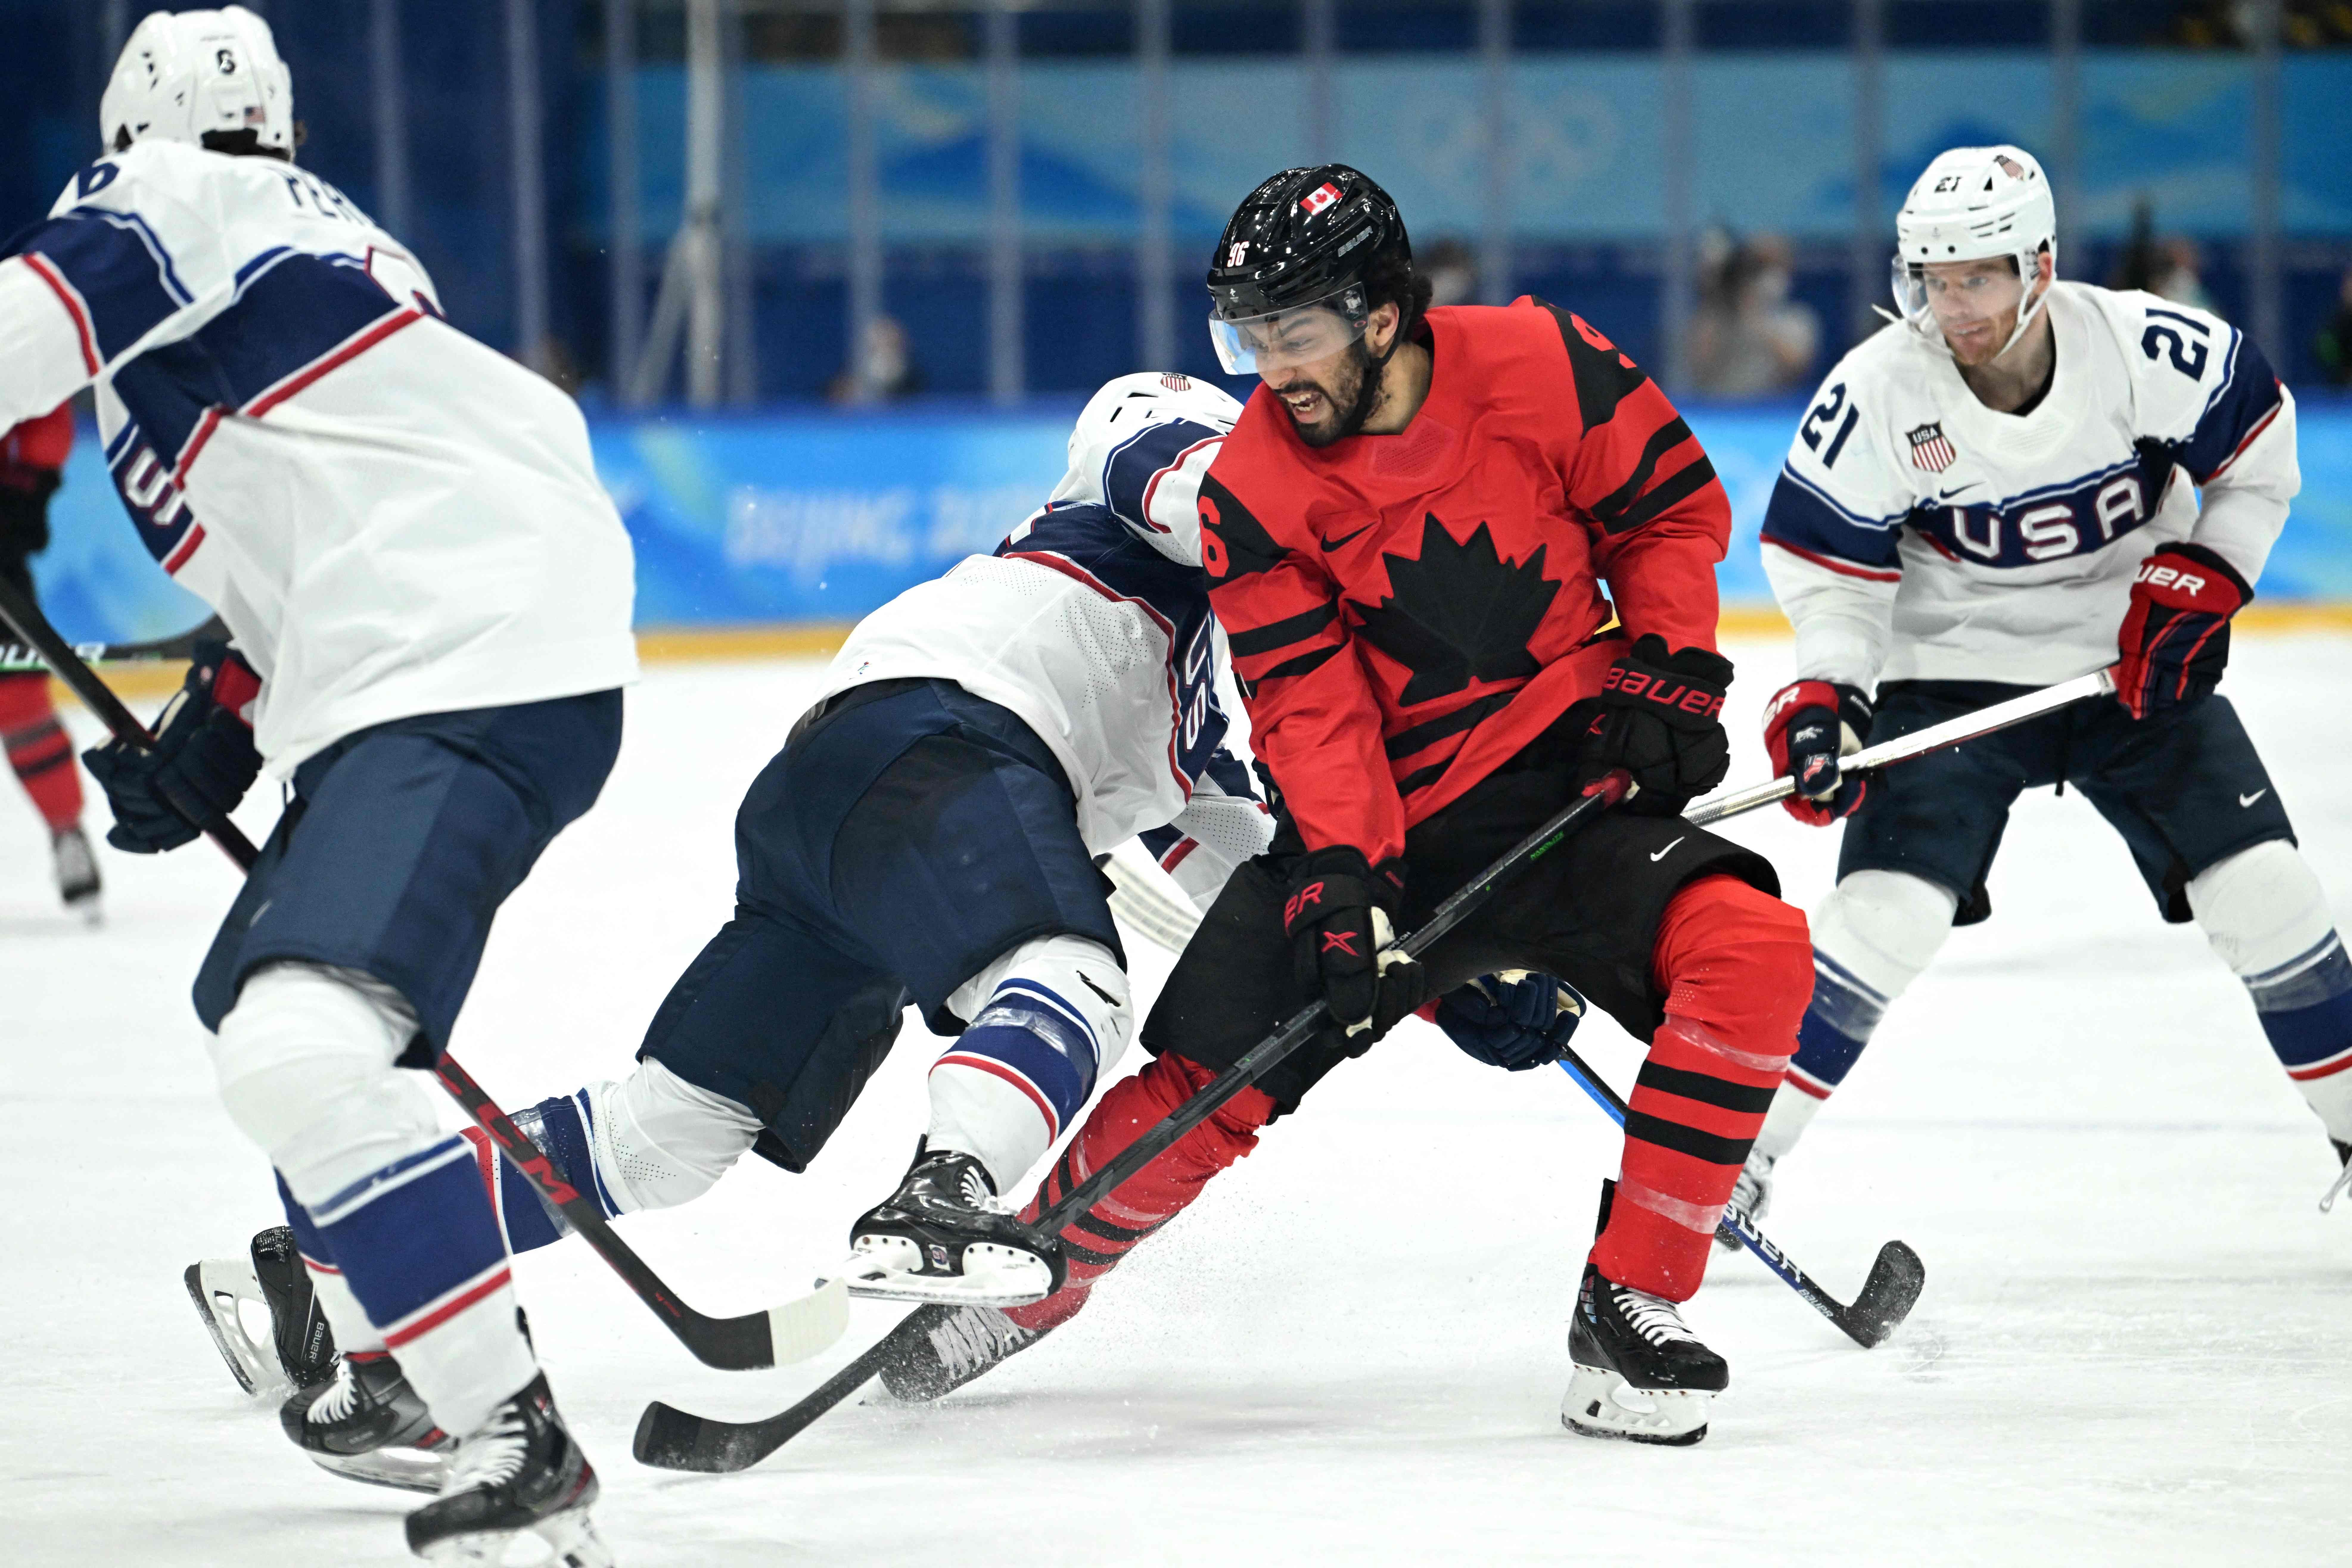 Team USA snags win over rival Canada in men's Olympic hockey